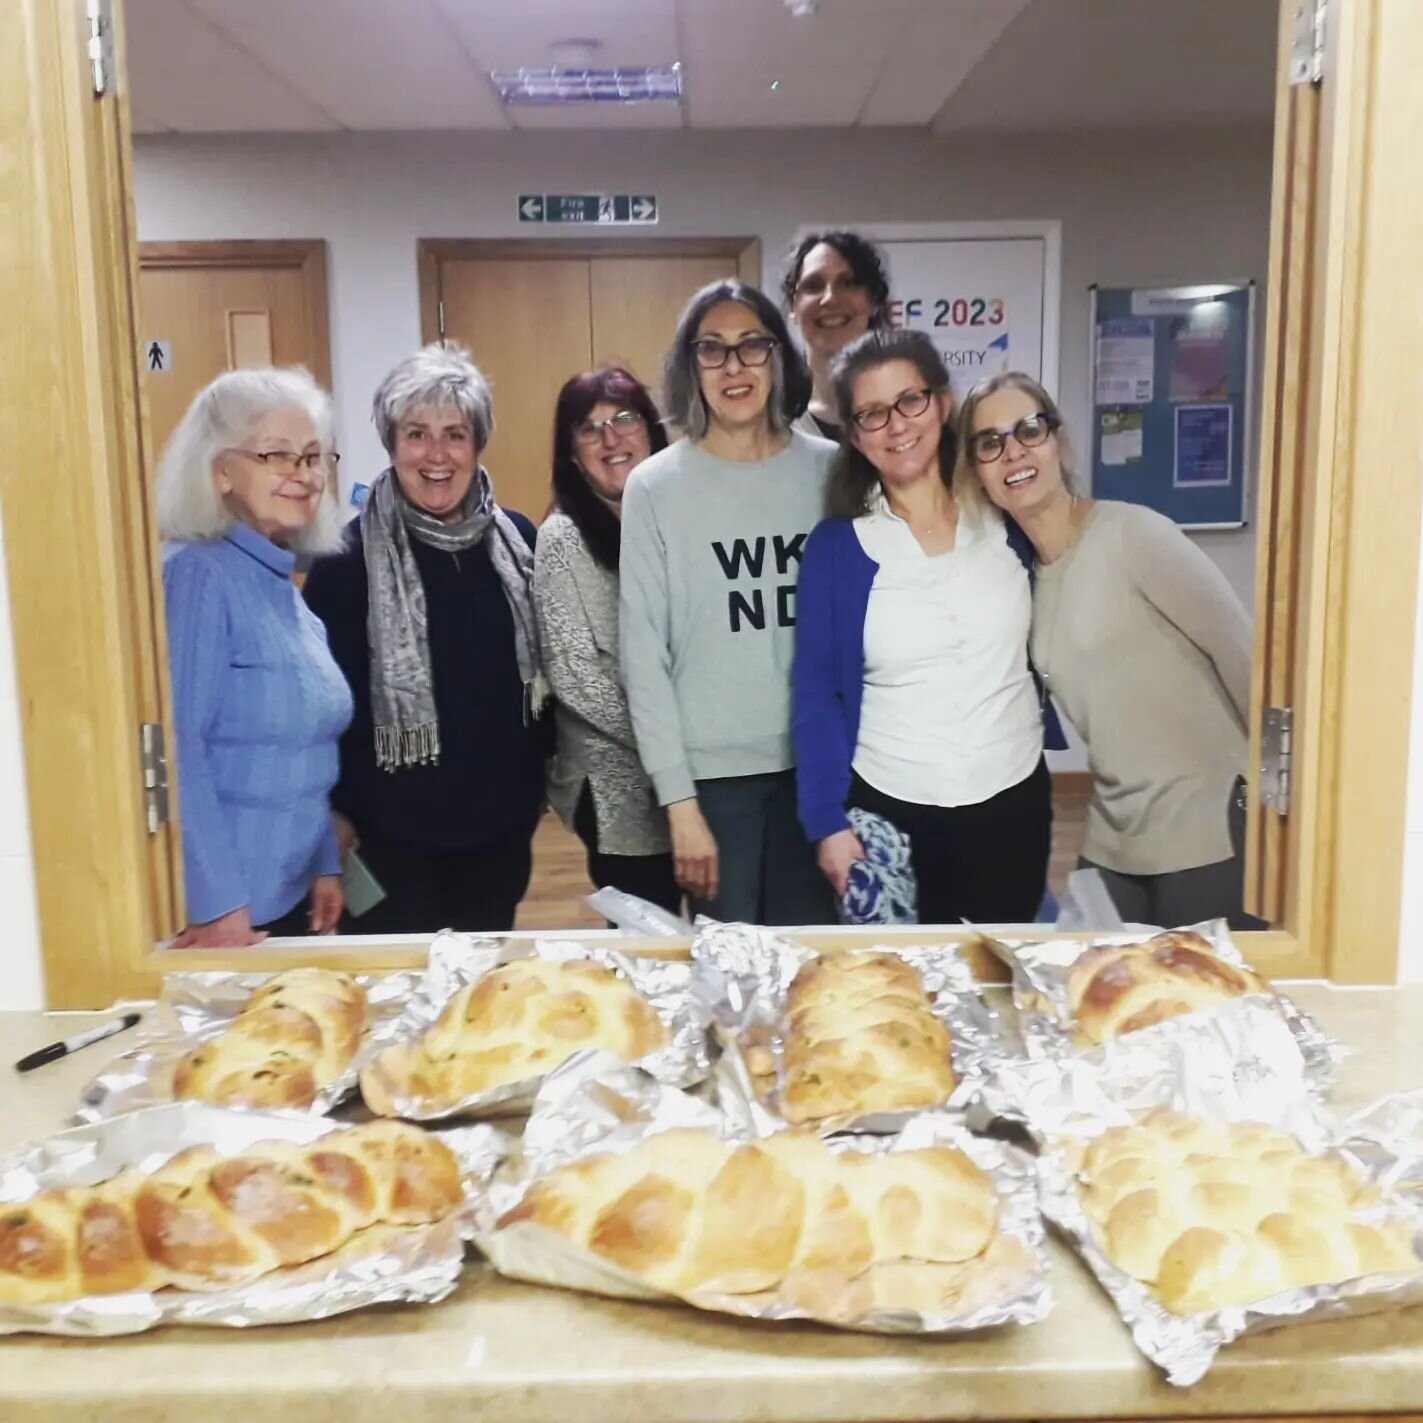 Thanks to our Challah Bakers who came out on a rainy evening to learn and practise making challah! Special thanks to Ruth and Mikayla for leading the session. Some of the challot from the event will be used at our Community Onegs in May, June and Jul